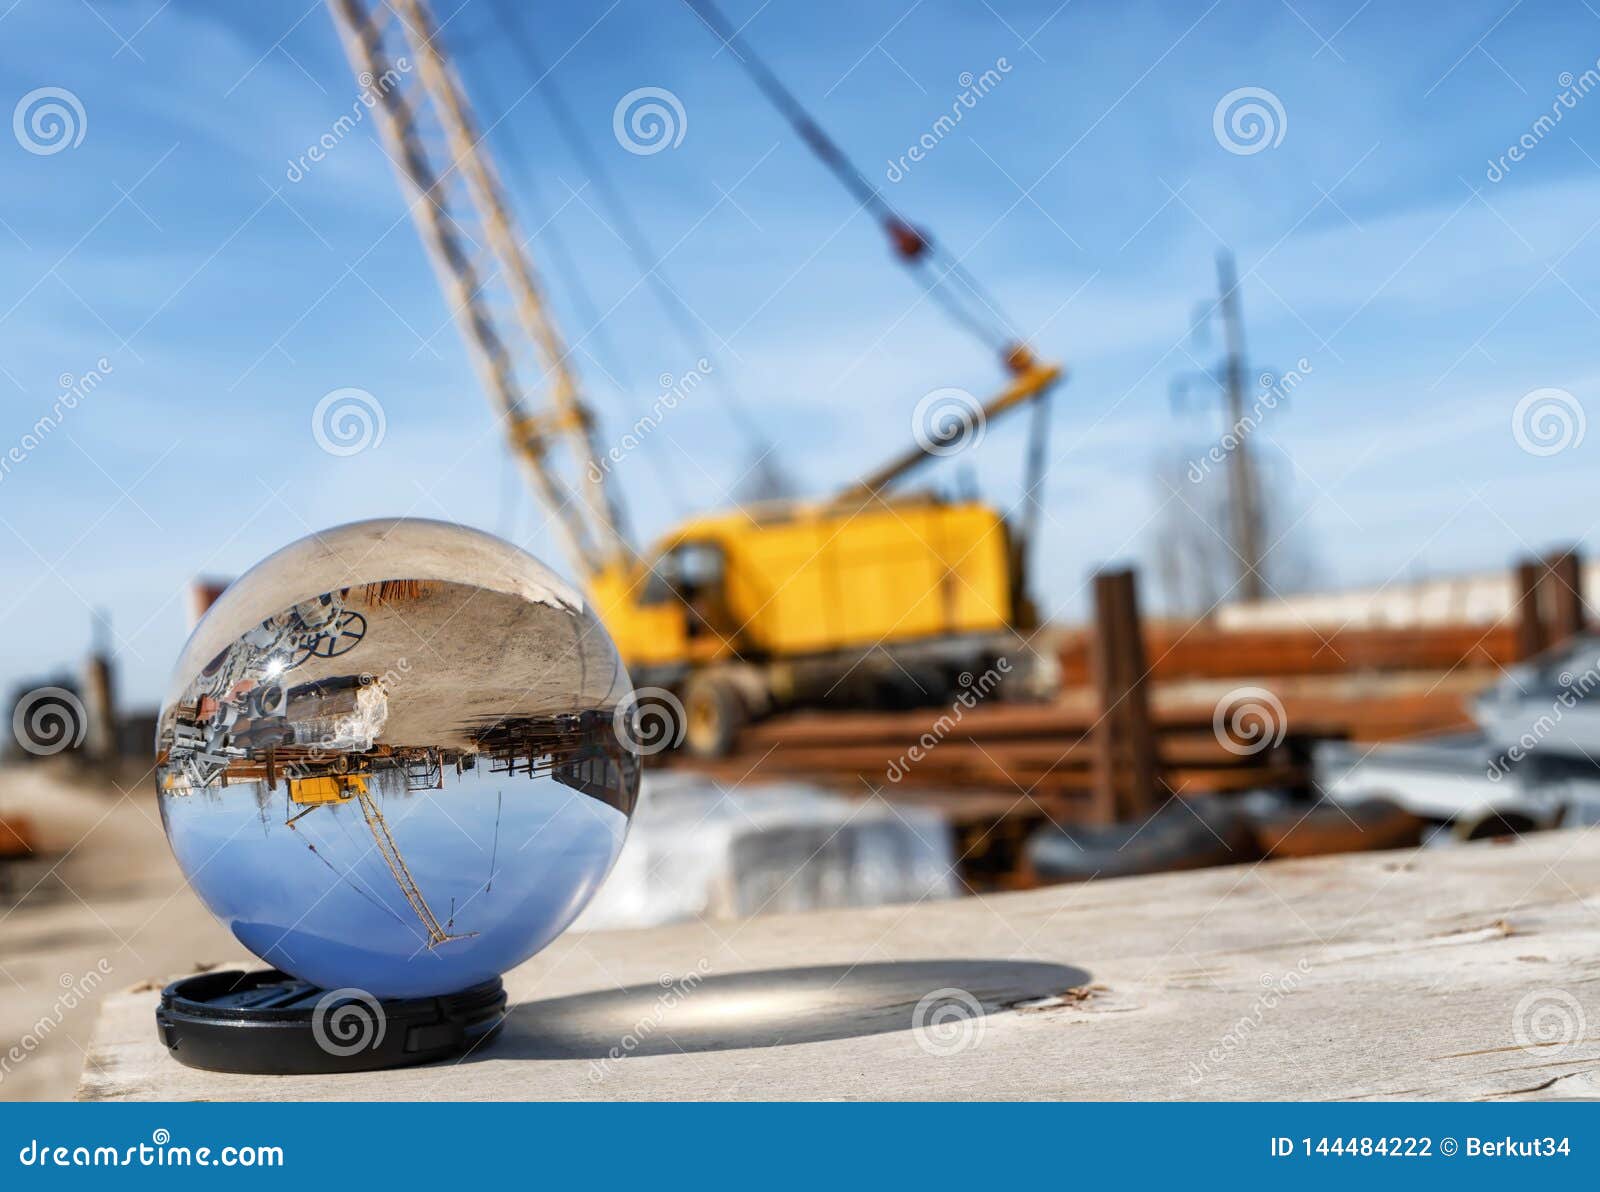 View of base of building materials with a large crane through an optical lens ball. View of the base of building materials with a large yellow crane through an optical glass ball